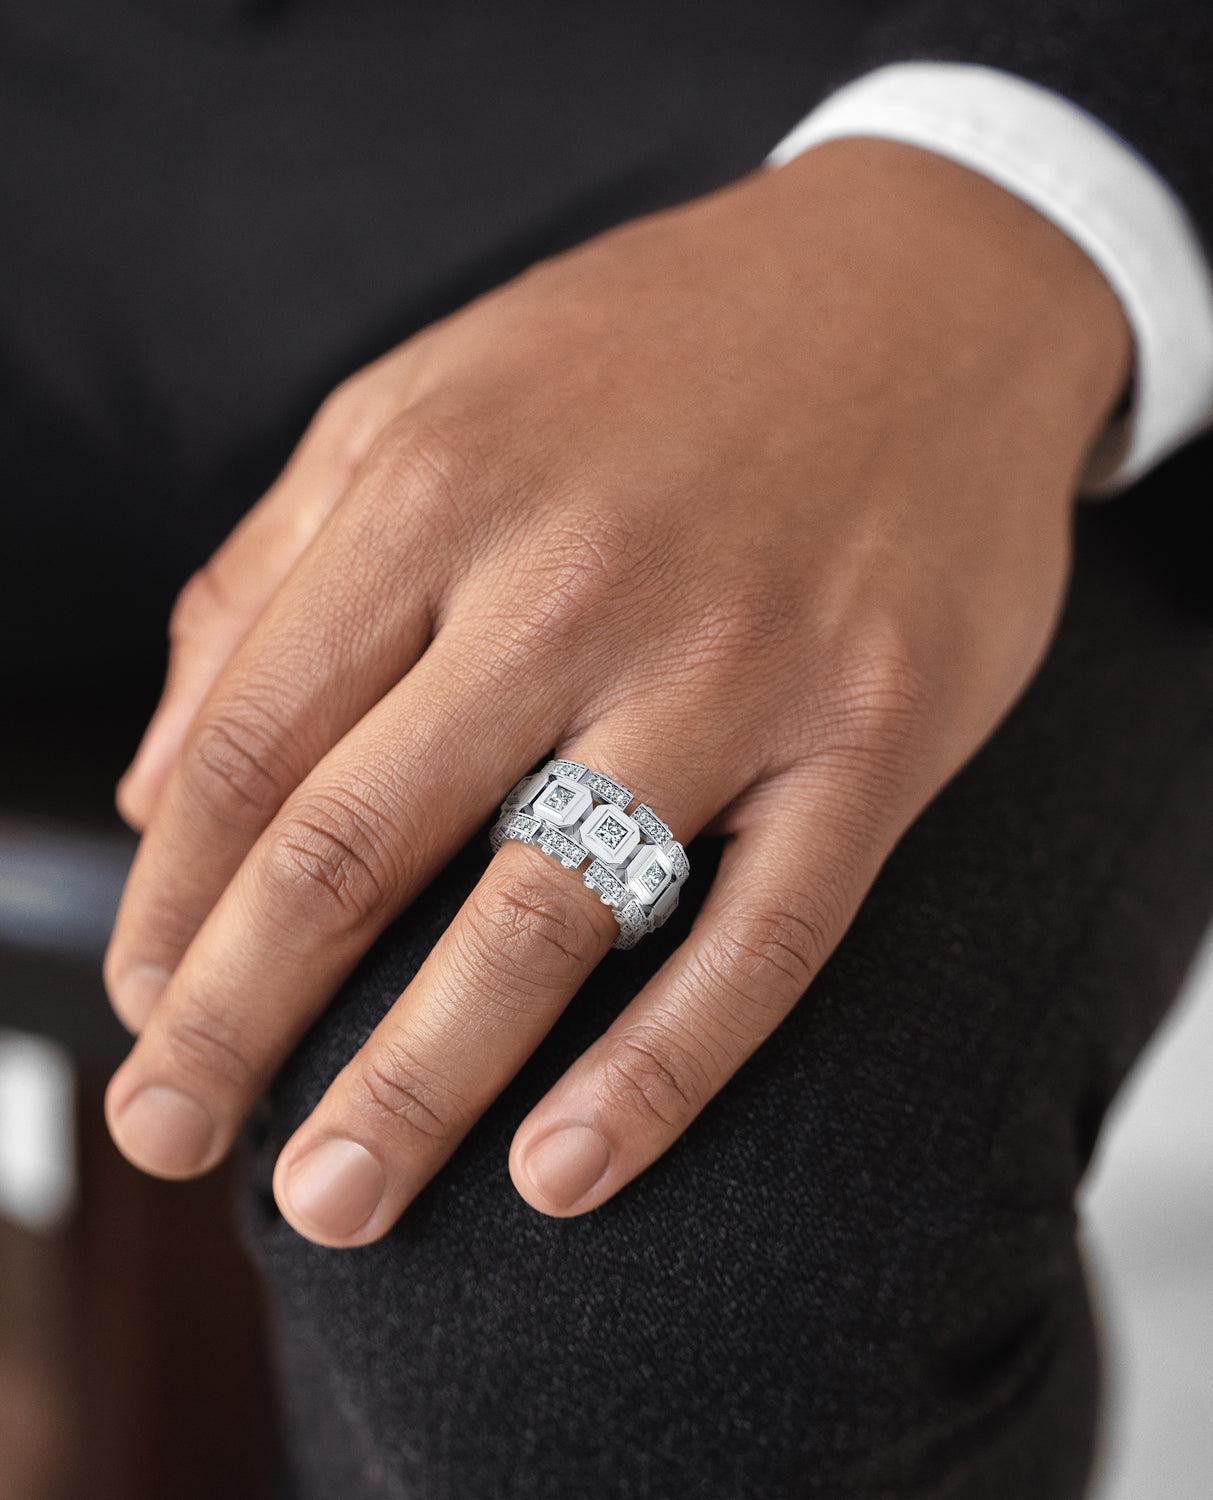 The design of this band bridges two different styles in its variations of 3.30ct white diamond pave setting and metals: contemporary classic and cutting-edge modern. The La Paz, often enjoyed as an exceptional statement piece, can even be worn as a